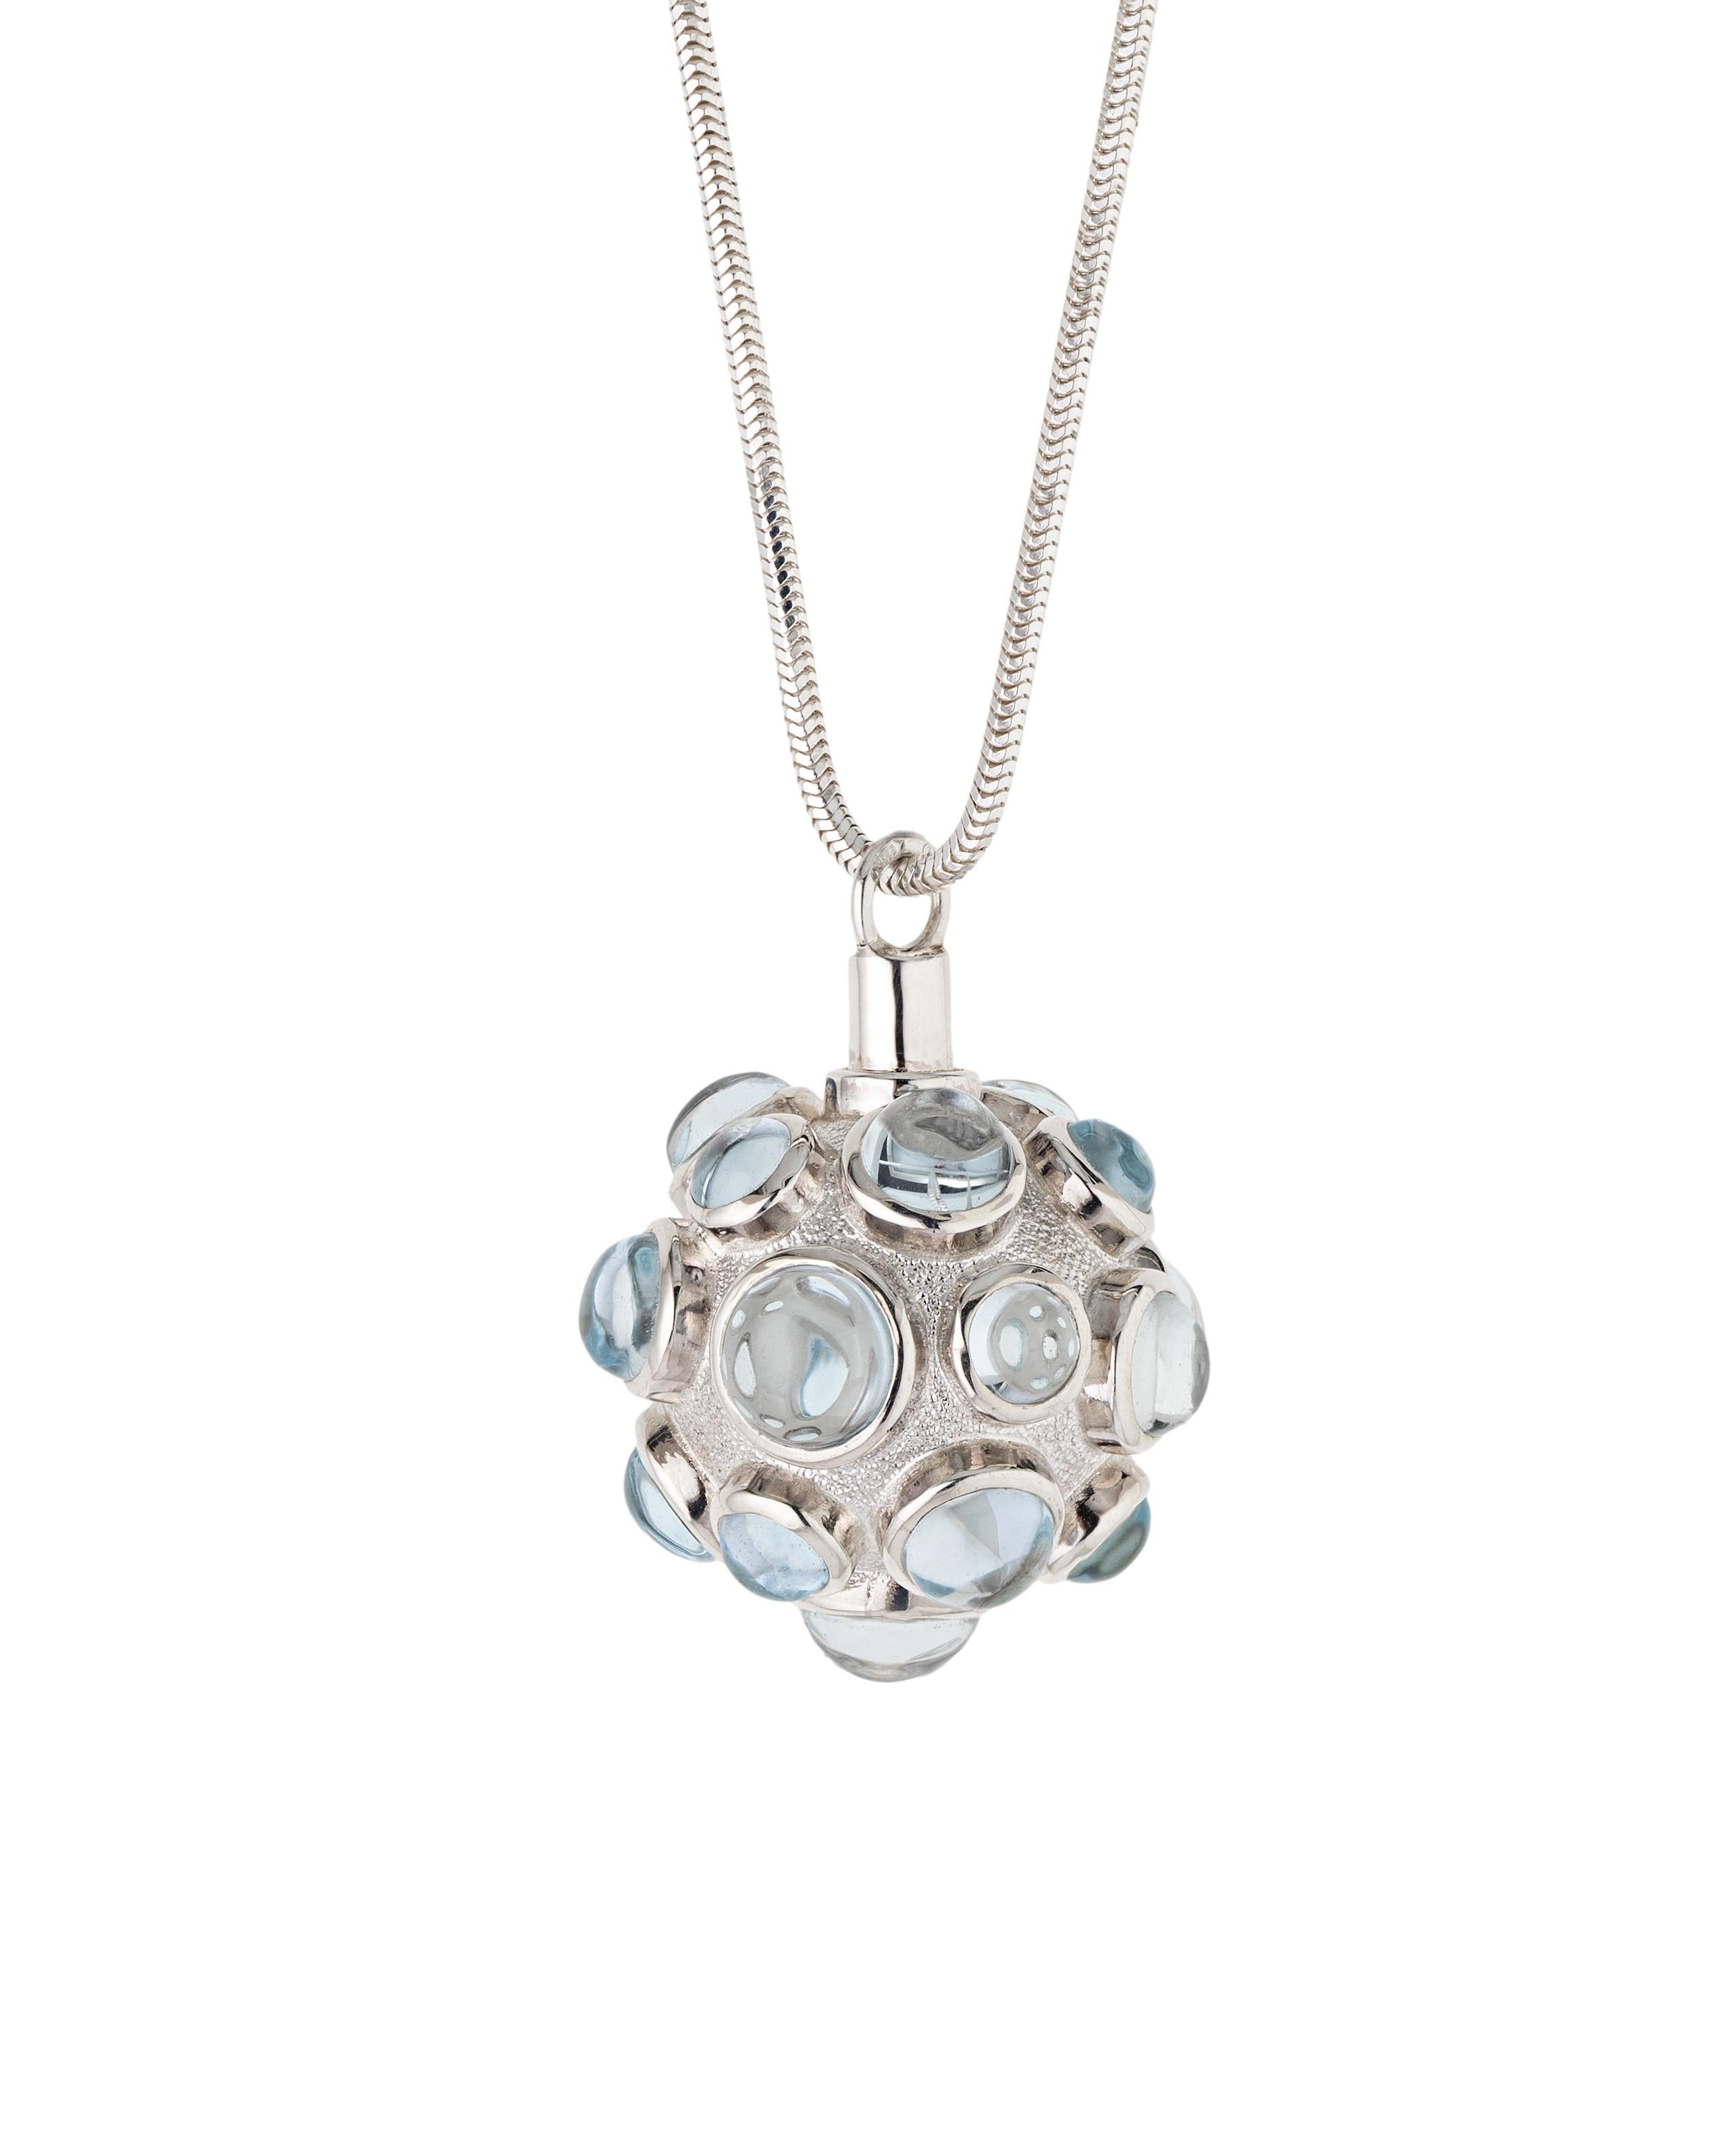 Silver necklace with topaz gemstones. This jewelry piece is like a refreshing sip of spring, shining with heavenly blue stones delightful to the eye.

Modern and stylish ring composition and topaz light toys give your style uniqueness, charm, and